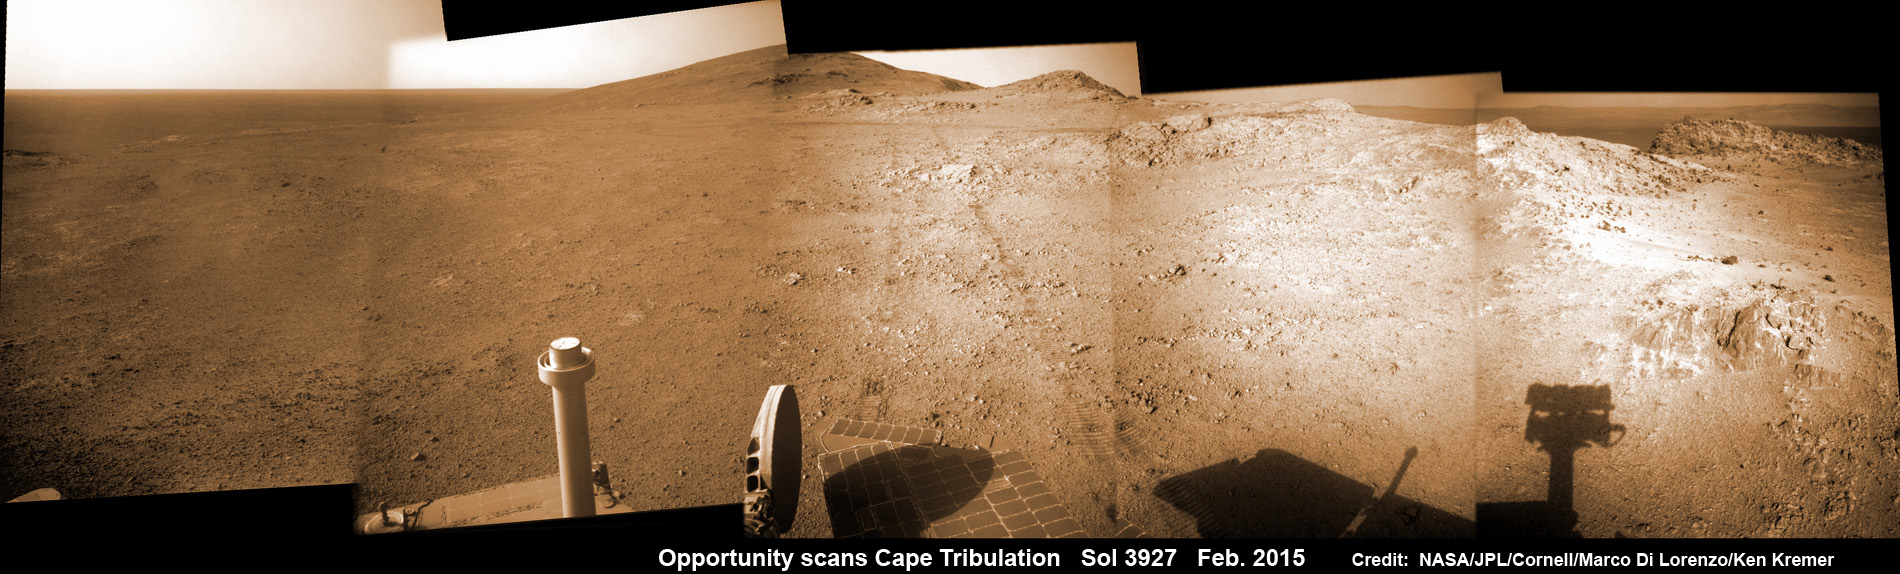 NASA Opportunity Rover scans back to summit of Cape Tribulation on Endeavour crater and overlooking crater rim while driving ahead to Martian science treasure at Marathon Valley on Feb. 10, 2015.  The rover operates well after 11 Years on Mars.   Note rover wheel tracks at center of this navcam camera photo mosaic assembled from images taken on Sol 3927 (Feb. 10, 2015) and colorized.  Credit: NASA/JPL/Cornell/ Marco Di Lorenzo/Ken Kremer/kenkremer.com